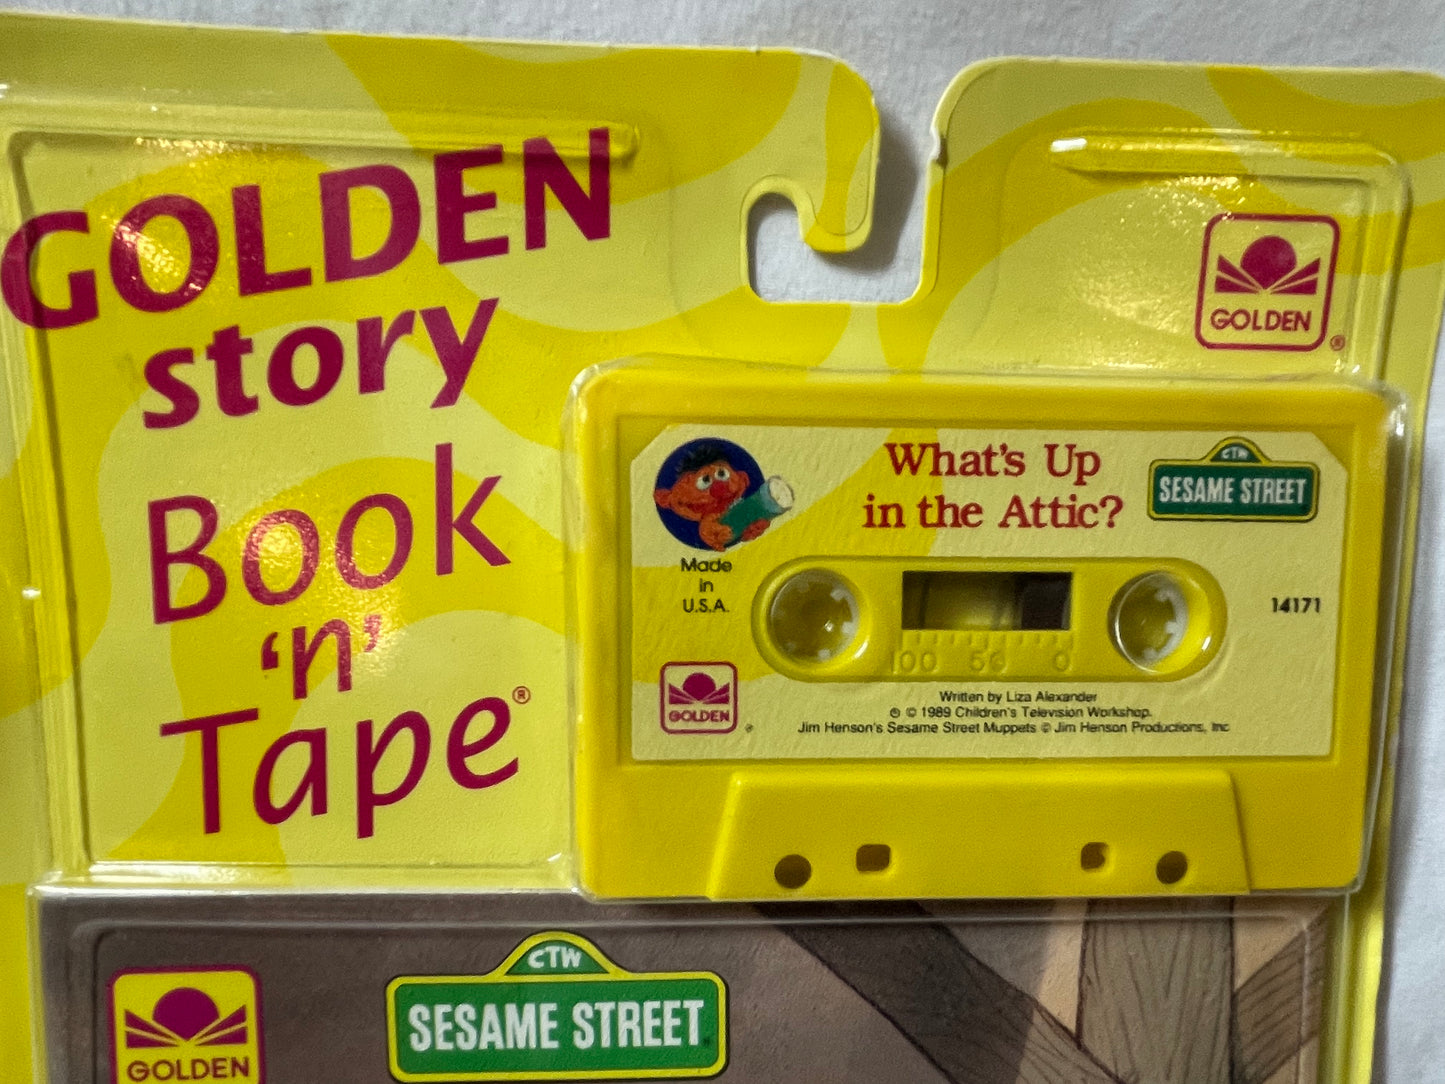 Golden Storybook Tape Set - Sesame Street “What’s Up in the Attic” 1992 #100083